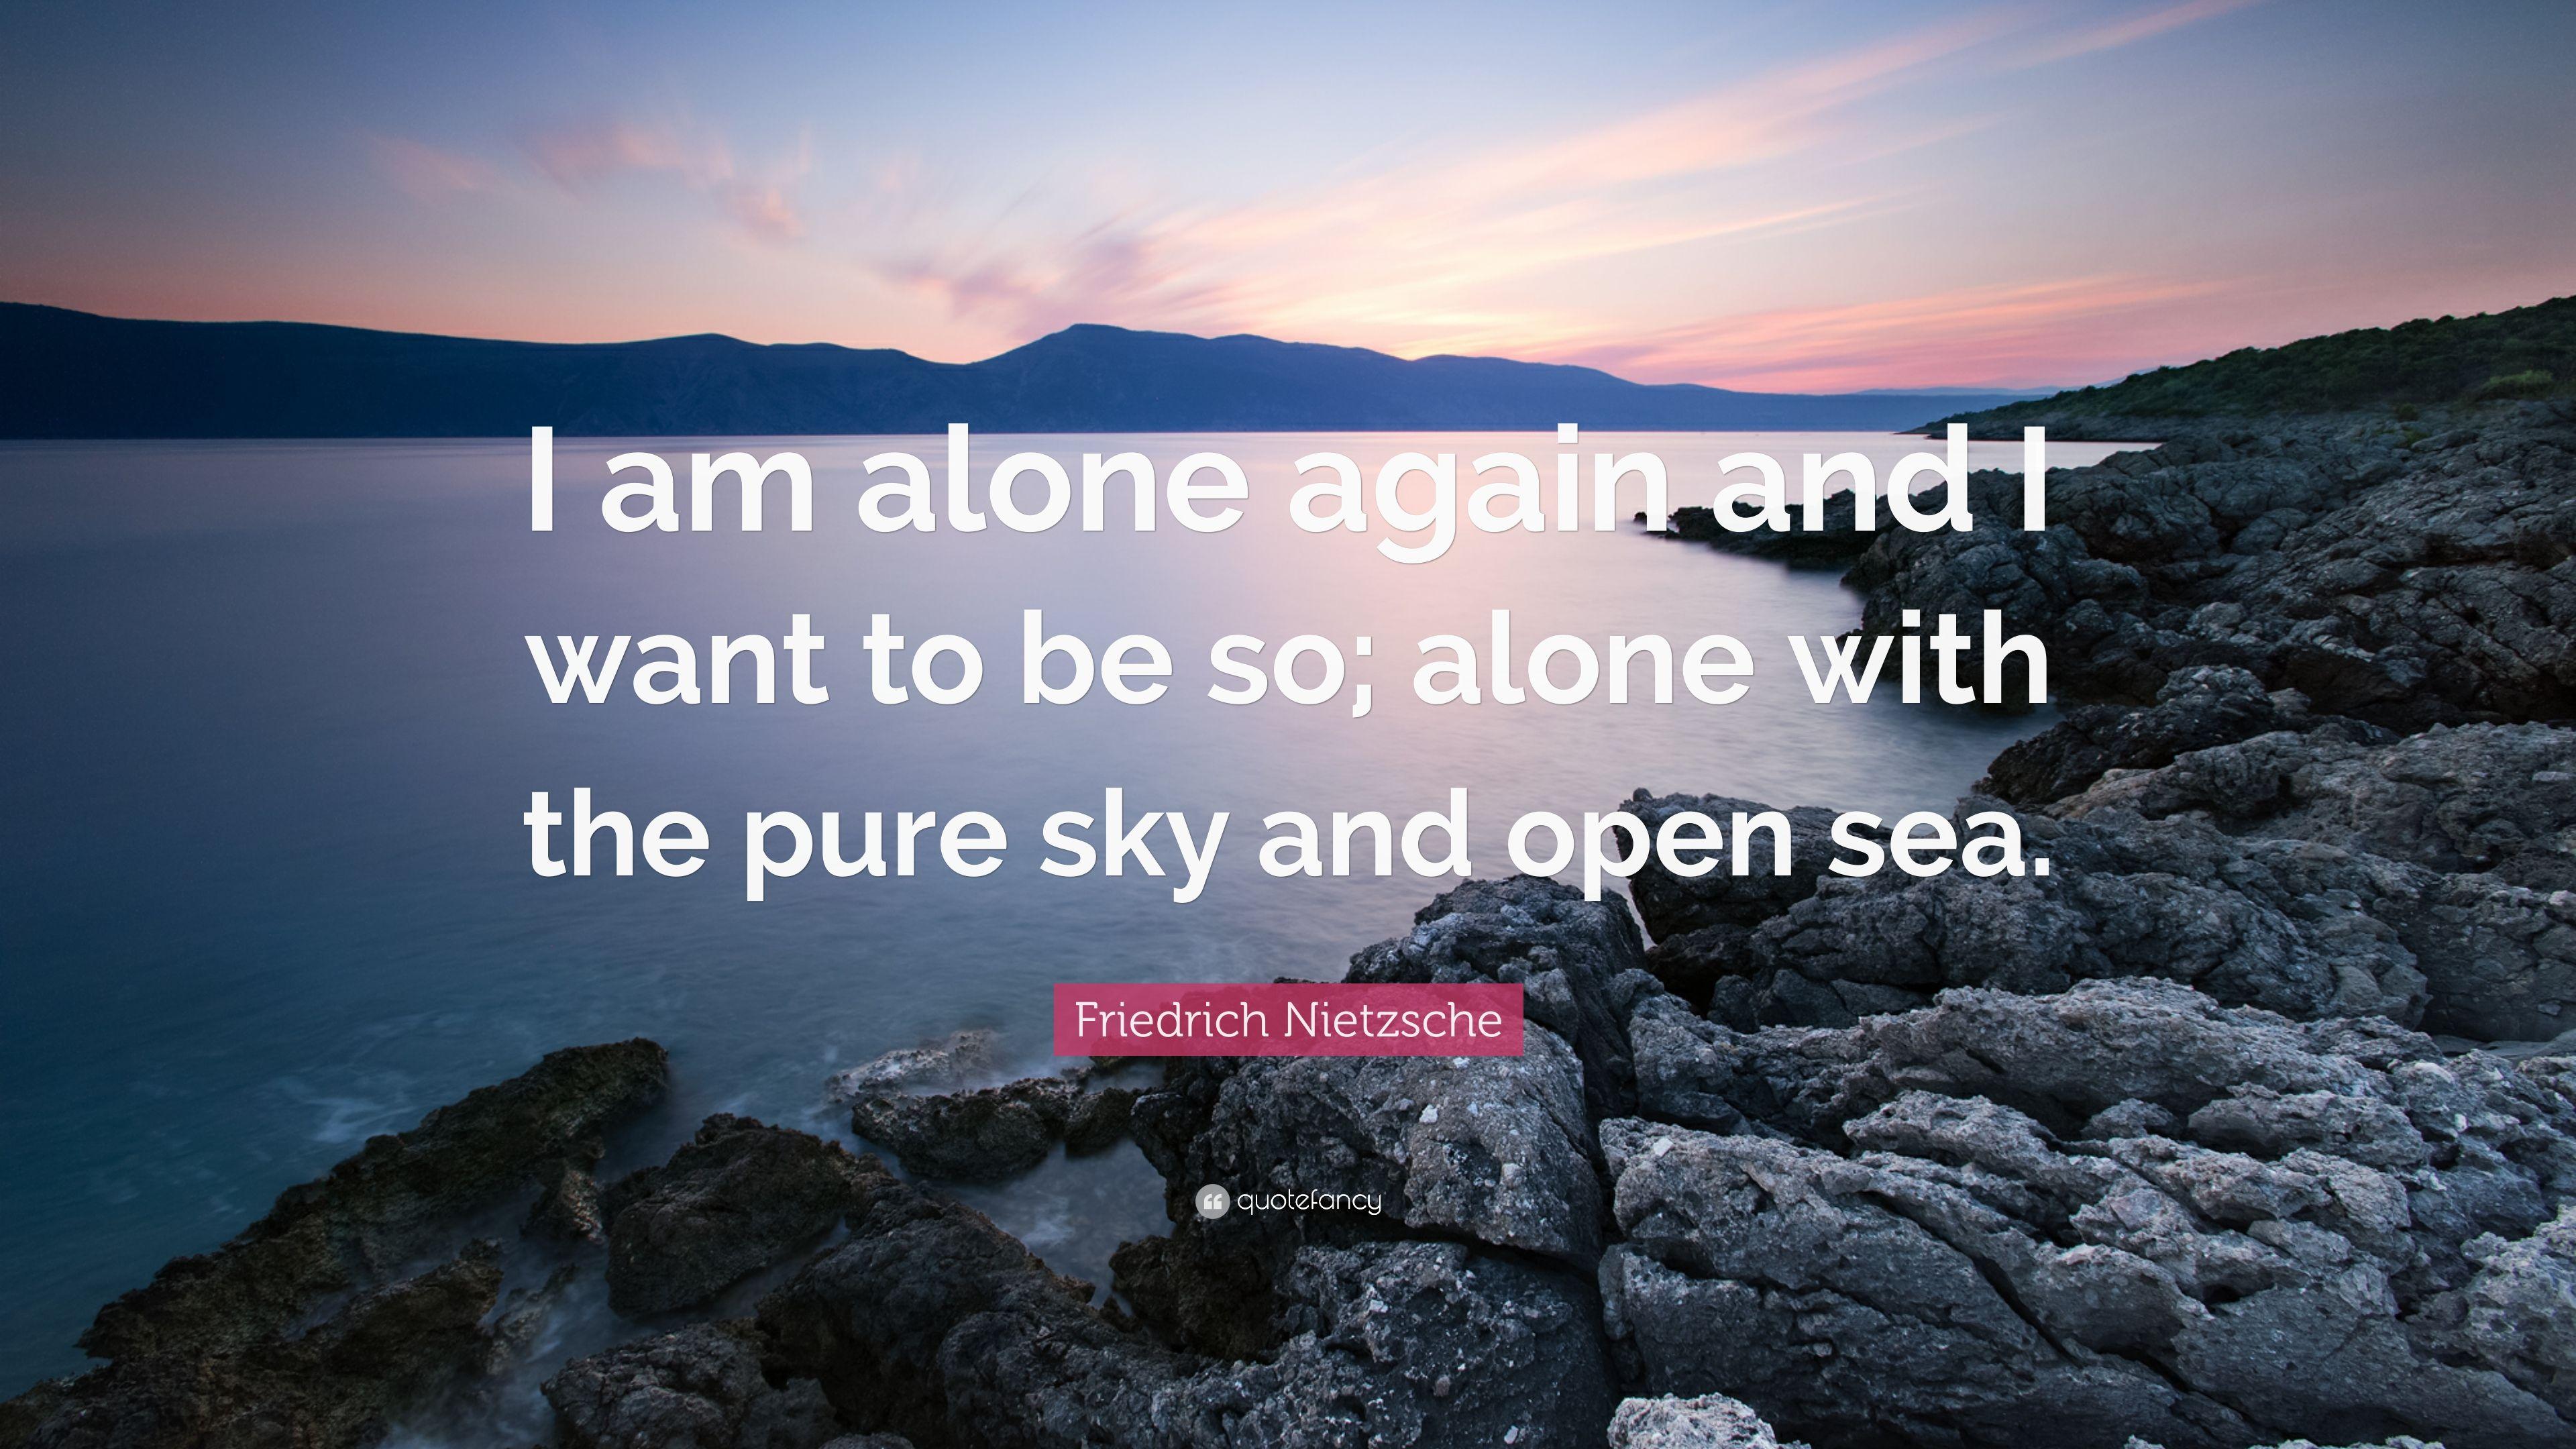 Friedrich Nietzsche Quote: “I am alone again and I want to be so